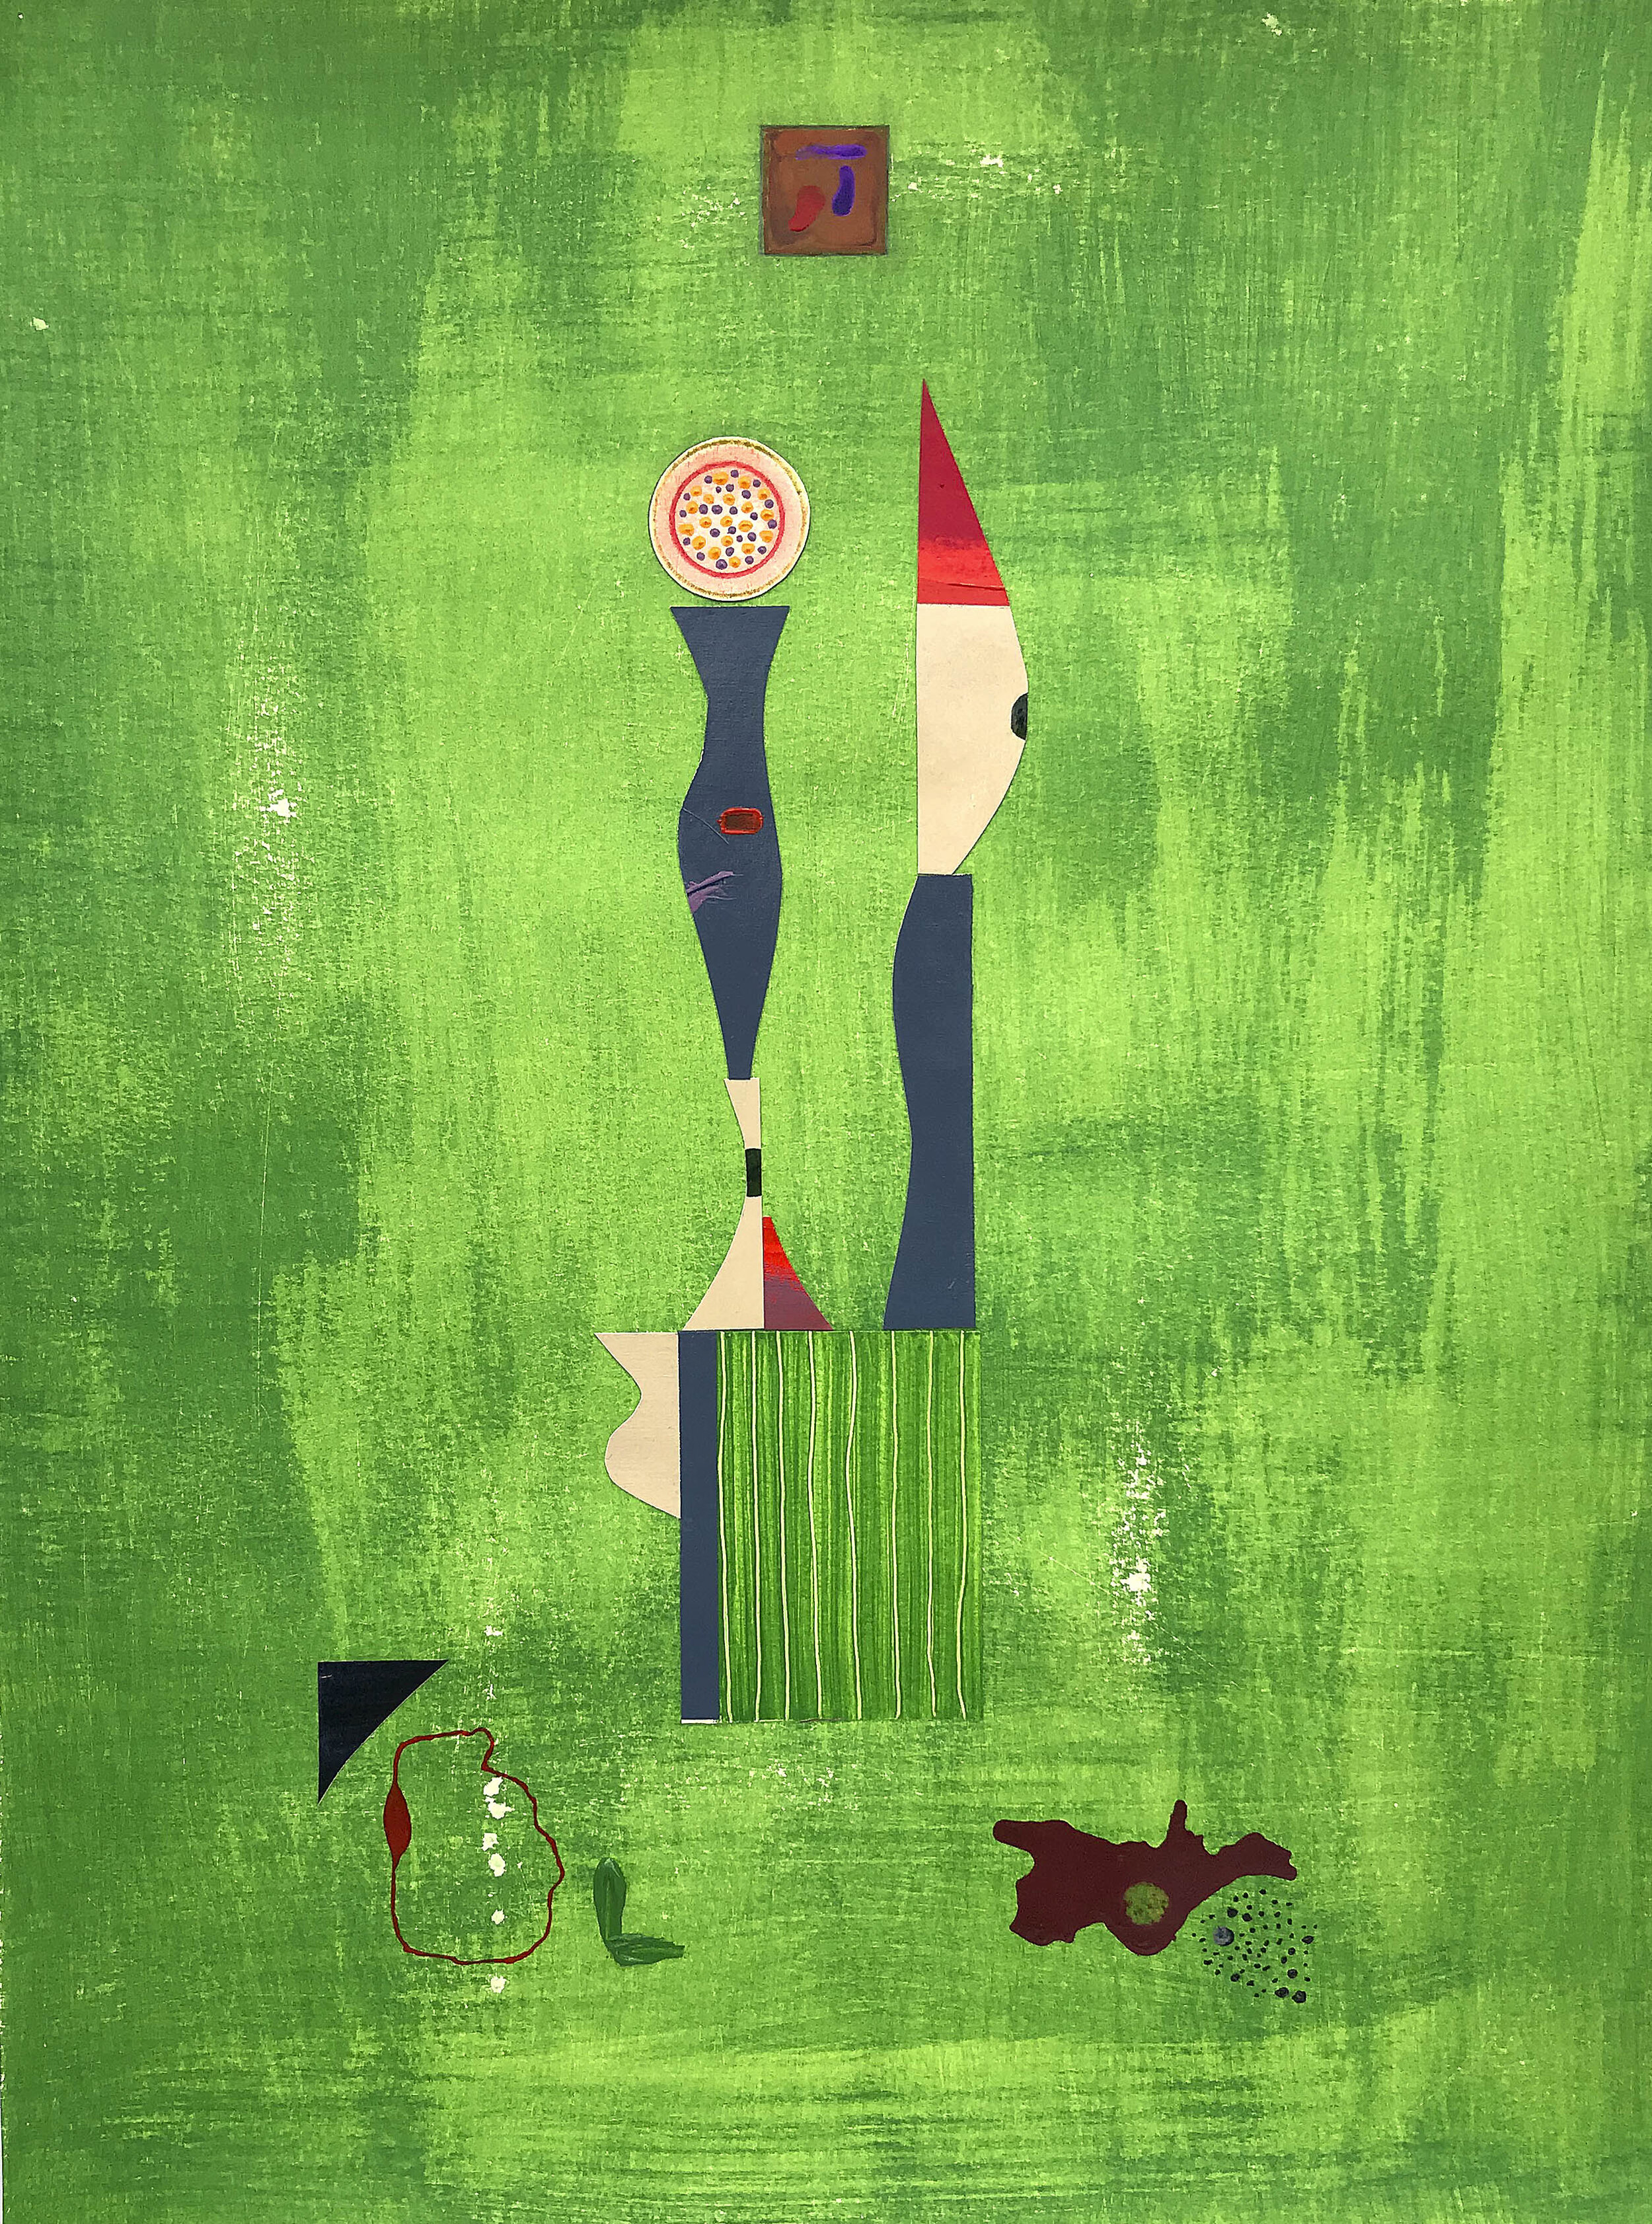  Bill Bailey   Green Totem,   2019 Mixed media on paper 24 x 18 in. YIMBY price $575  SOLD  